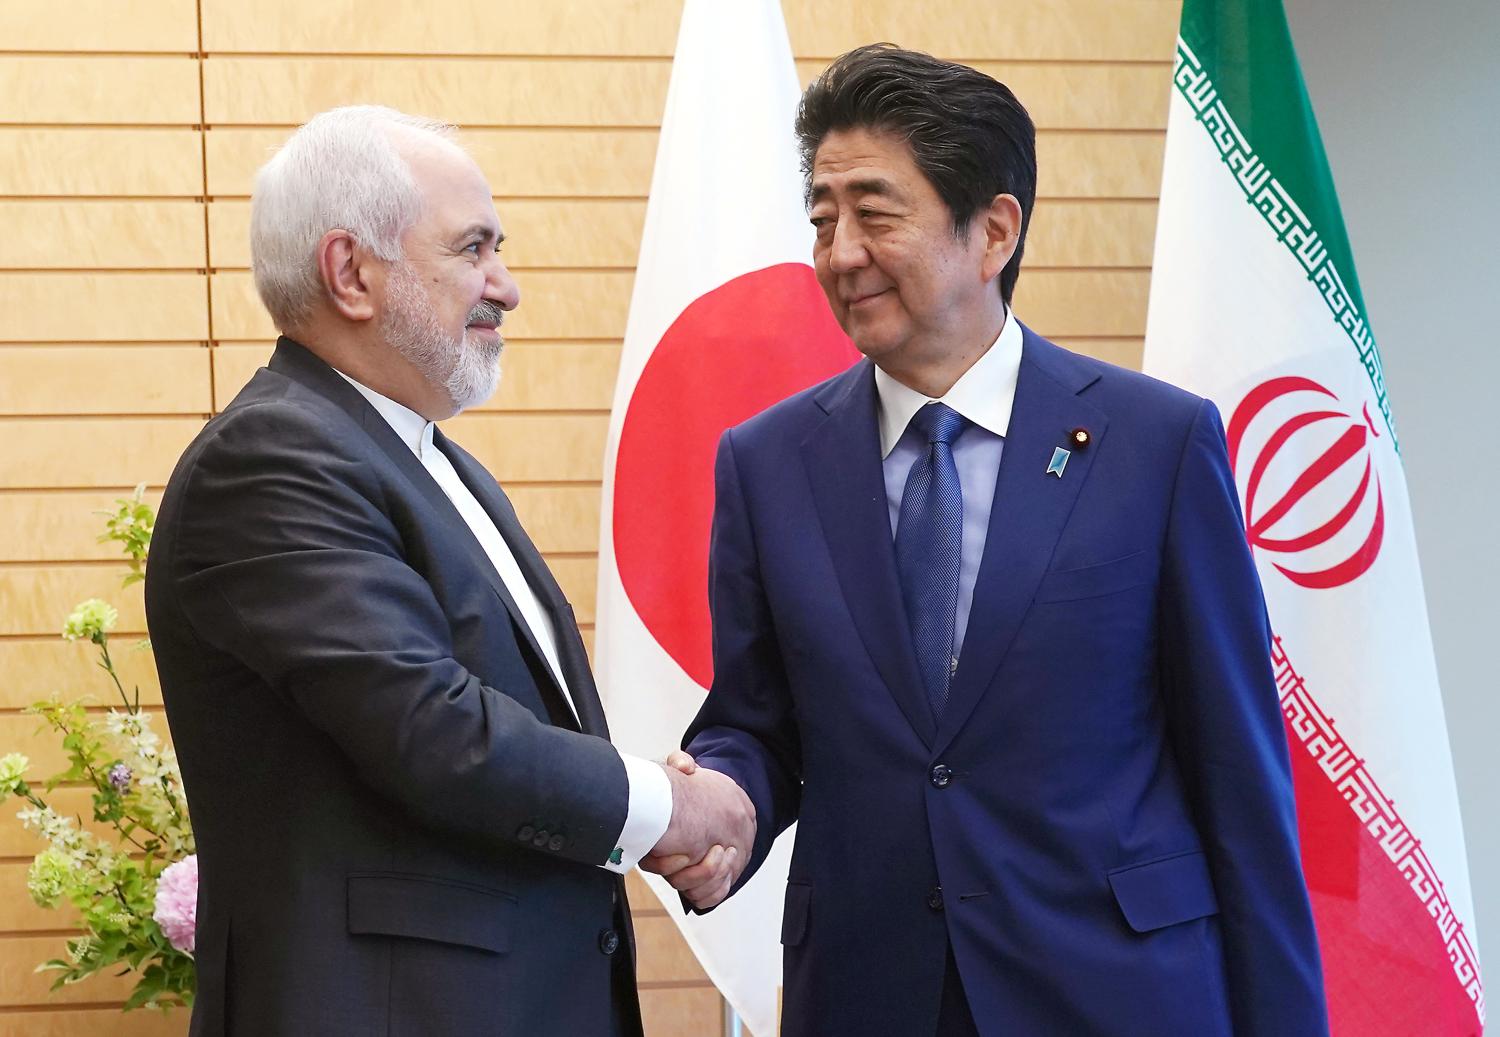 Iranian Foreign Minister Mohammad Javad Zarif, left, and Japanese Prime Minister Shinzo Abe, right, shake hands at Abe's official residence in Tokyo Thursday, May 16, 2019. Eugene Hoshiko/Pool via REUTERS - RC19838C3890